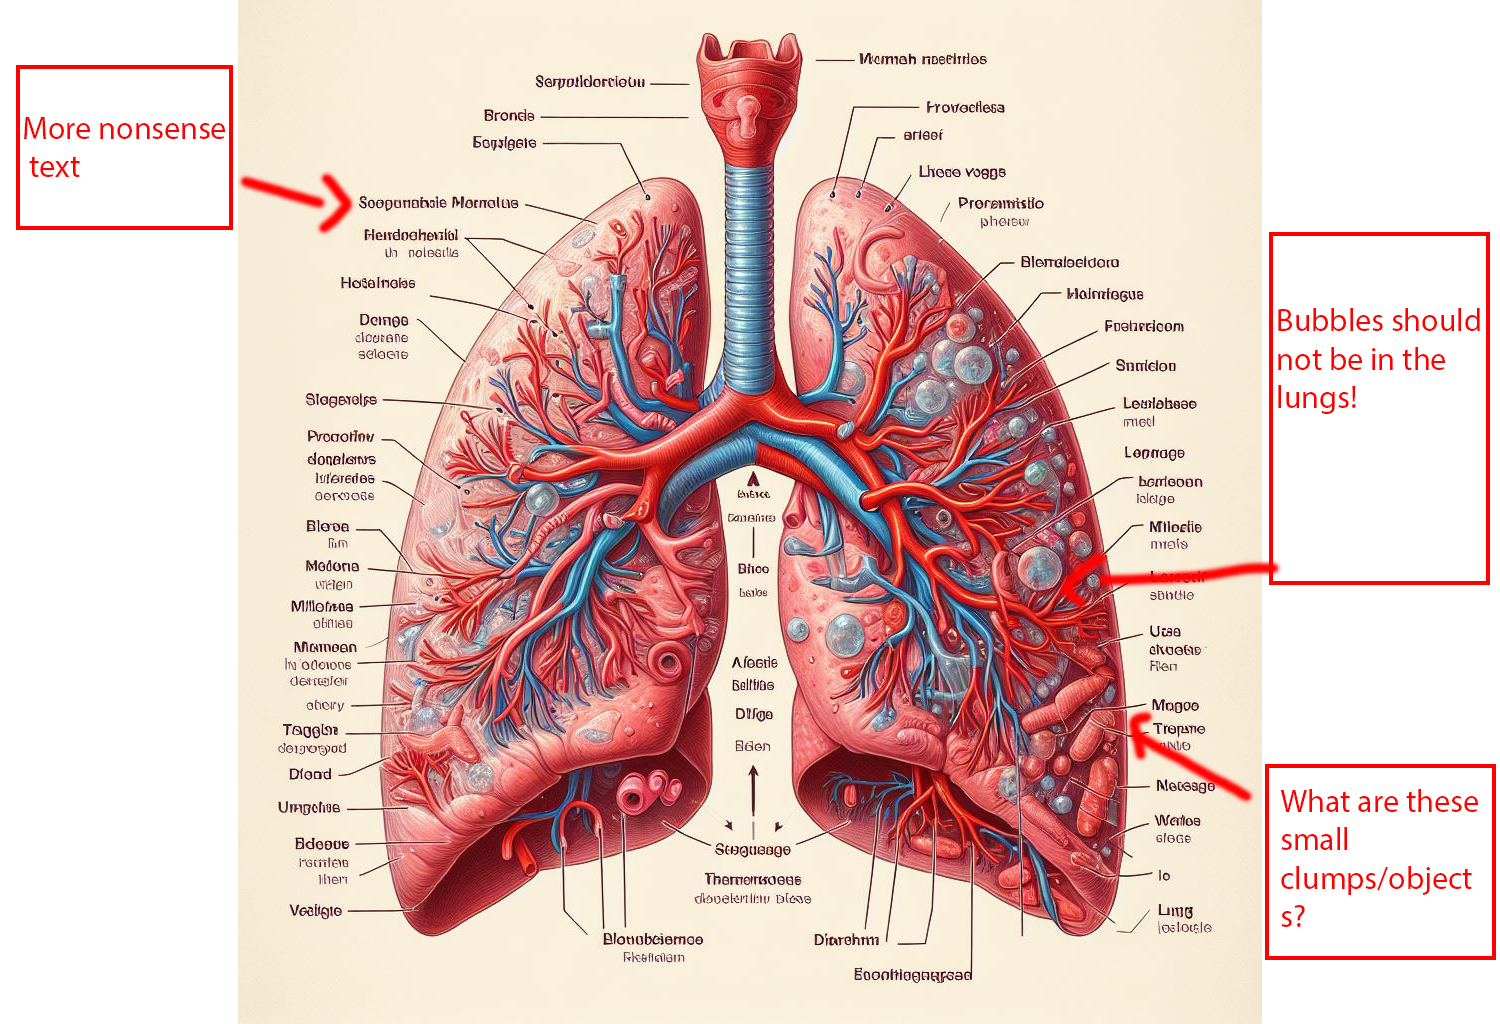 An image of an AI generated diagram of the lungs is featured with red text boxes pointing to errors. In the upper left, a box says "more nonsense text" and a red line points to oddly generated letters that mean nothing. On the right side, a box says "bubbles should not be in the lungs!" with a red line pointing to  what looks to be odd bubbles inside the lungs. Below it, a red box reads "what are these small clumps/objects?" and it points to what looks to be red large bacteria and clumps on the lungs. 
